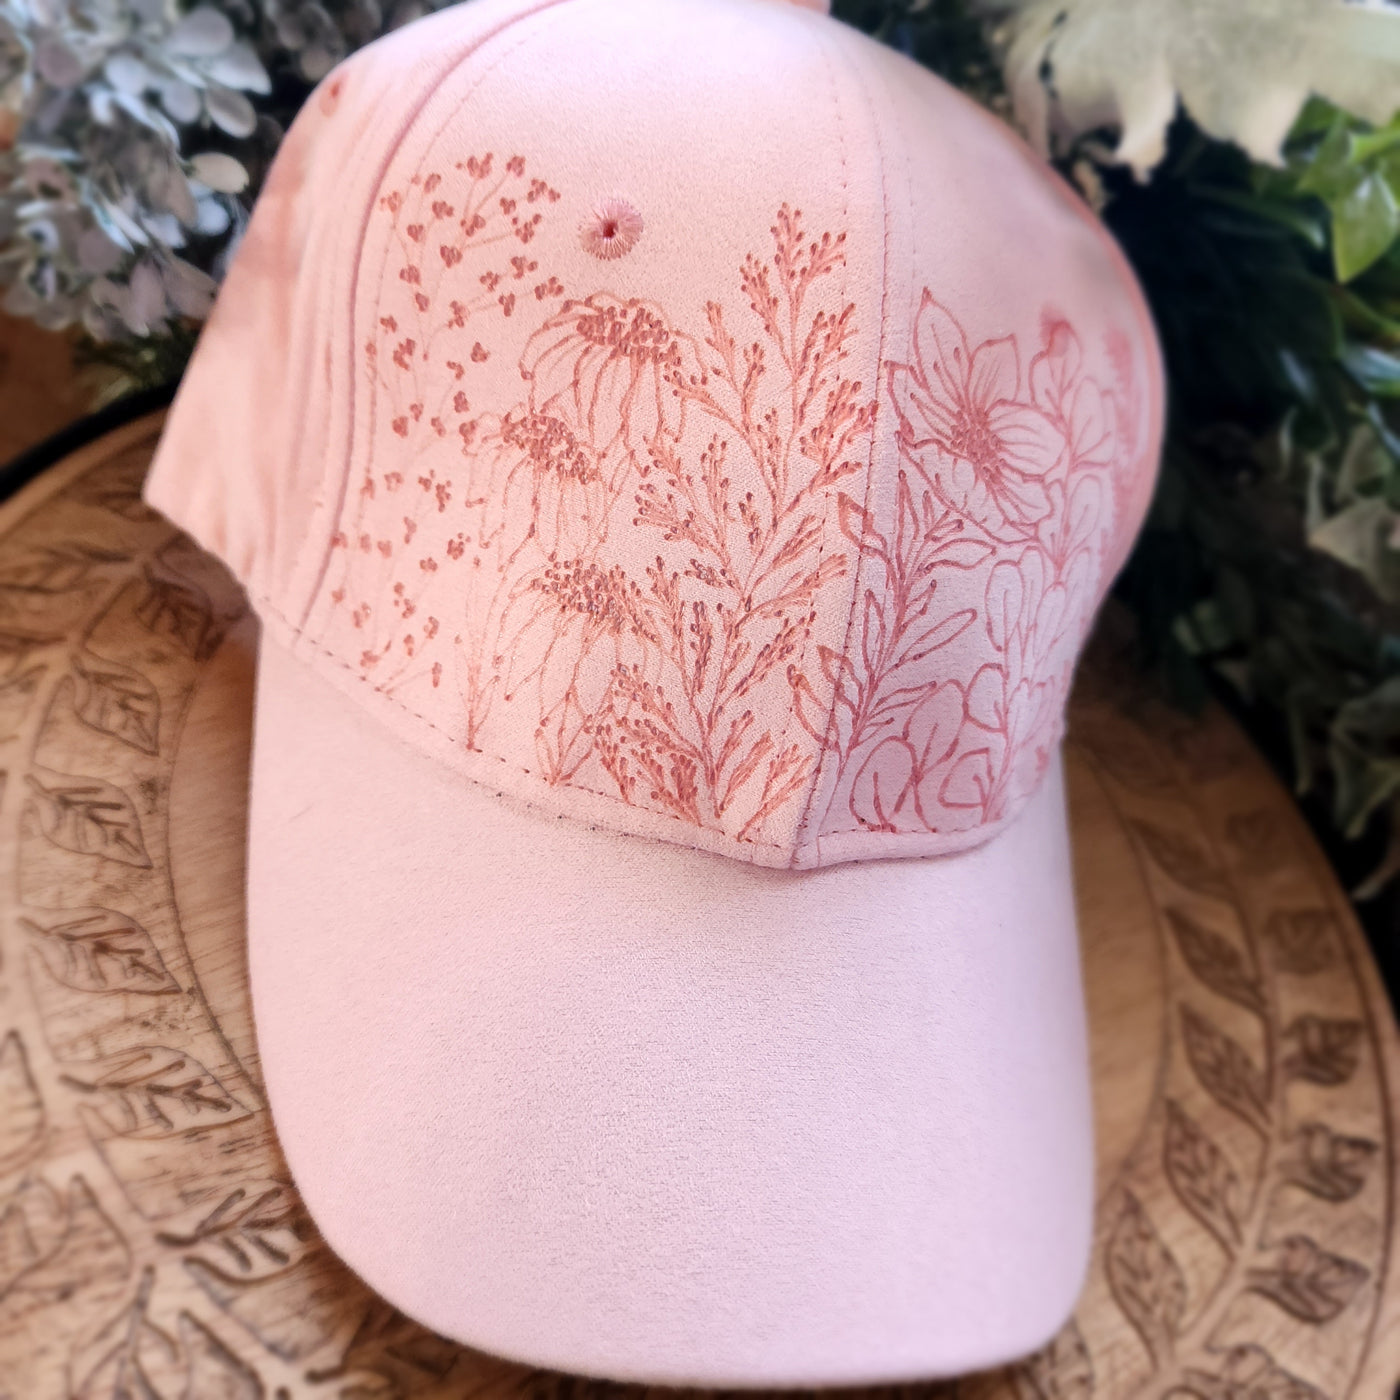 Floral Stems || Light Pastel Pink Baseball Style Suede Hat || Freehand Burned